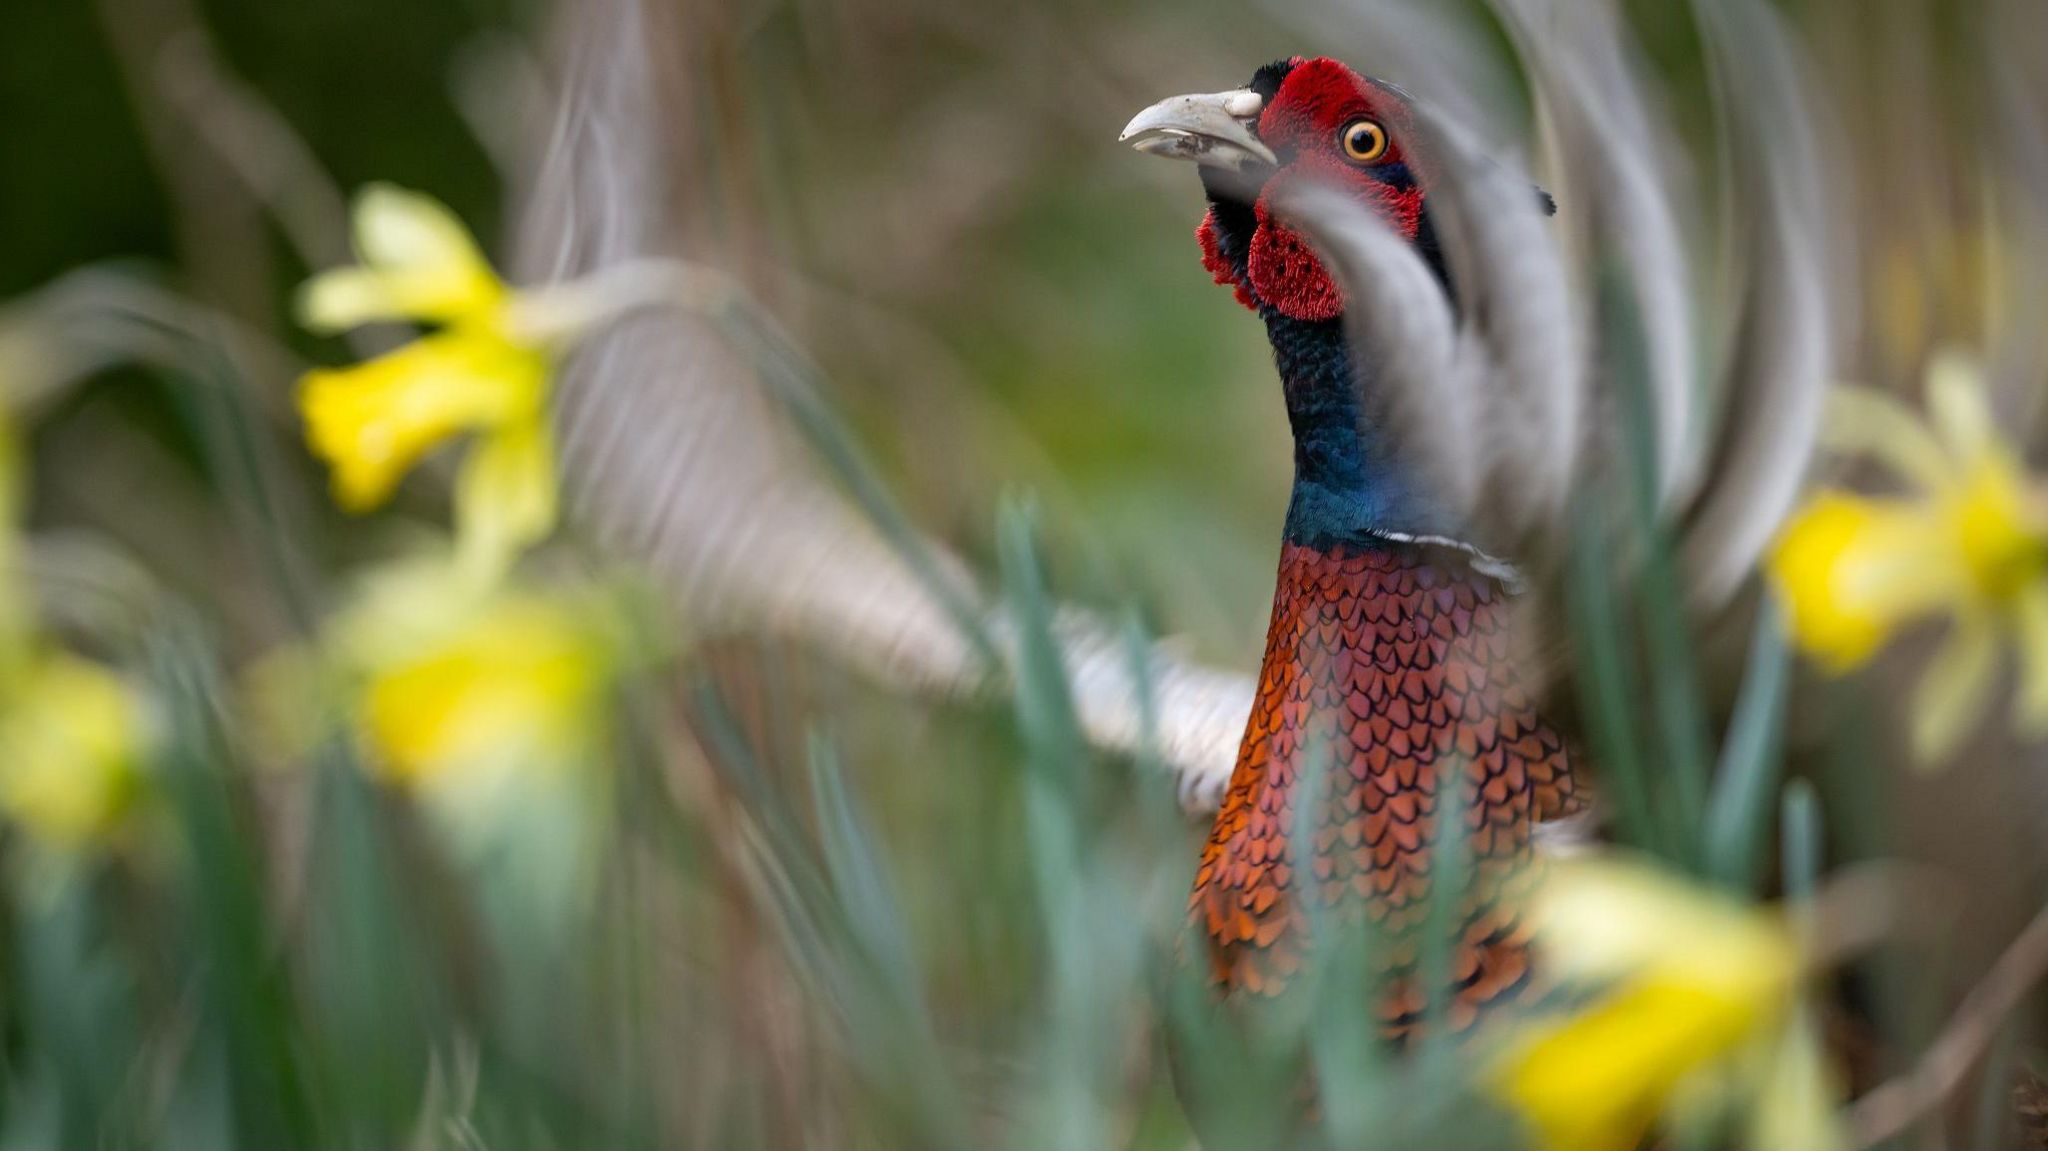 A photograph of a pheasant surrounded by daffodils